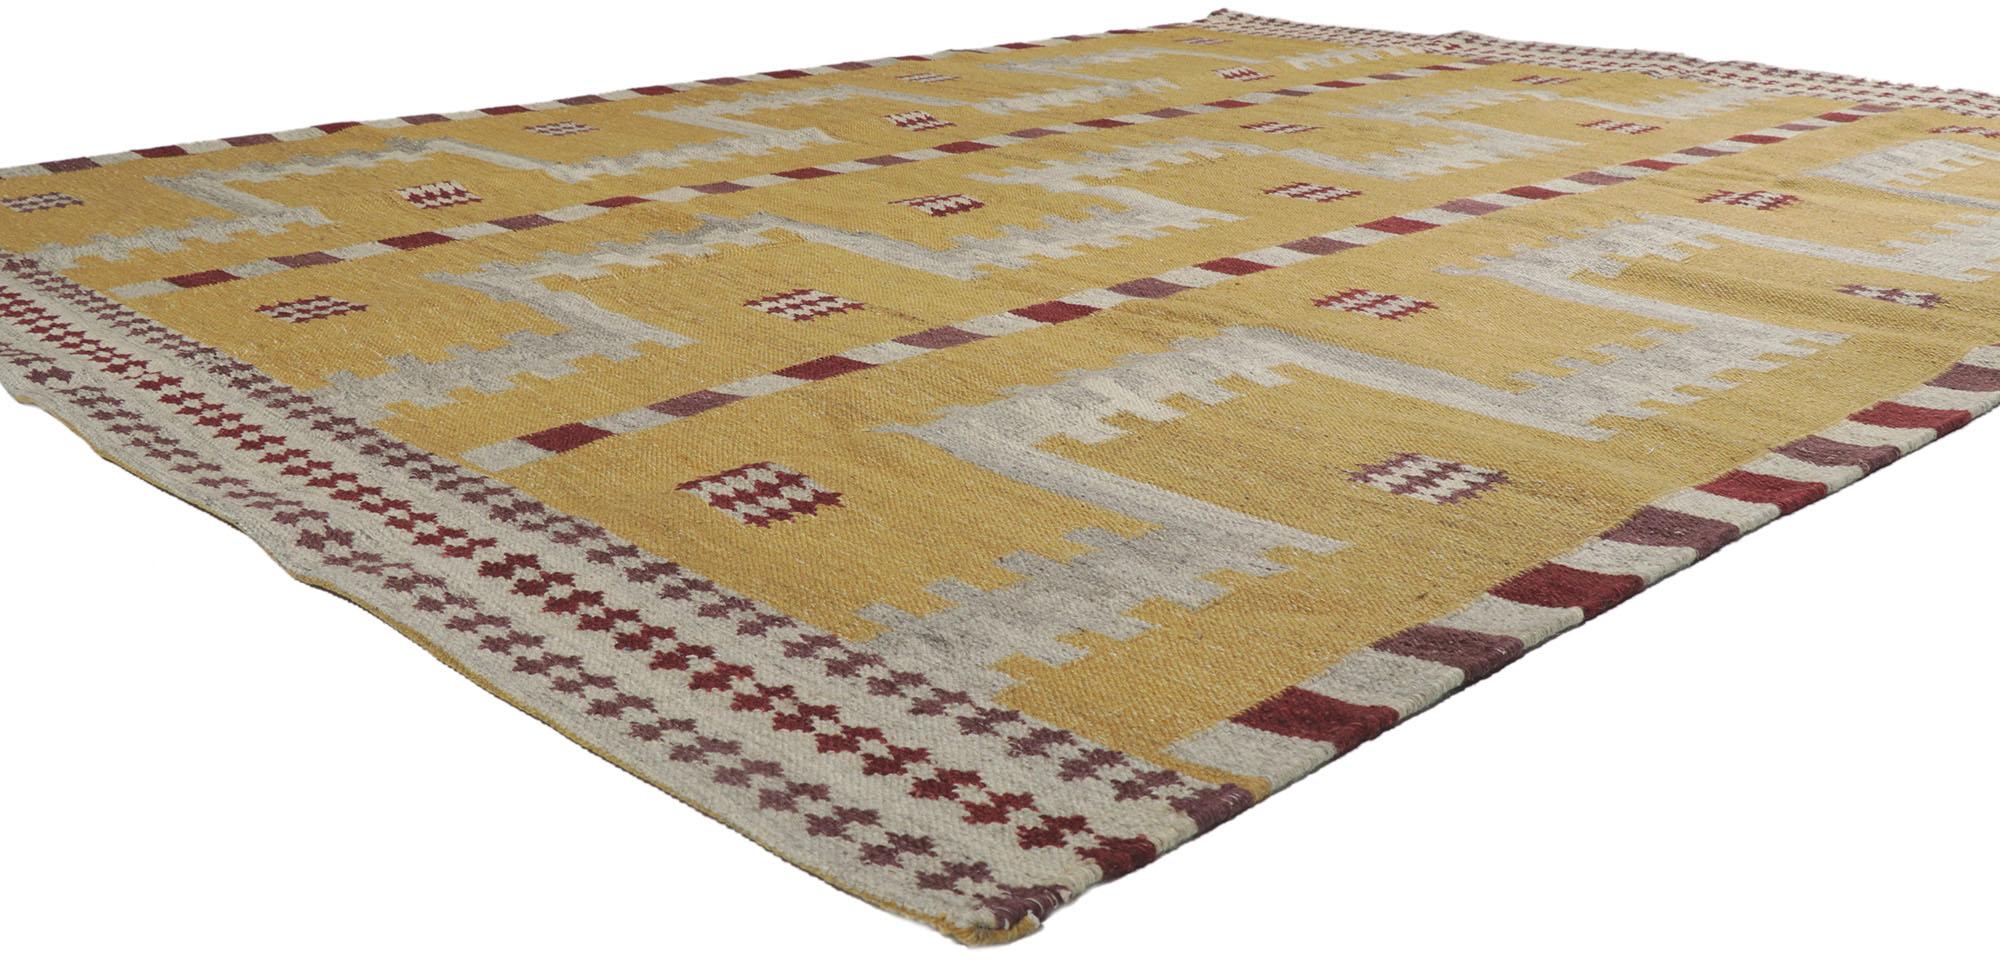 30674 New Swedish Inspired Kilim Rug with Scandinavian Modern Style 09'00 x 11'06. With its geometric design and bohemian hygge vibes, this hand-woven wool Swedish Kilim rug beautifully embodies the simplicity of Scandinavian modern style. The